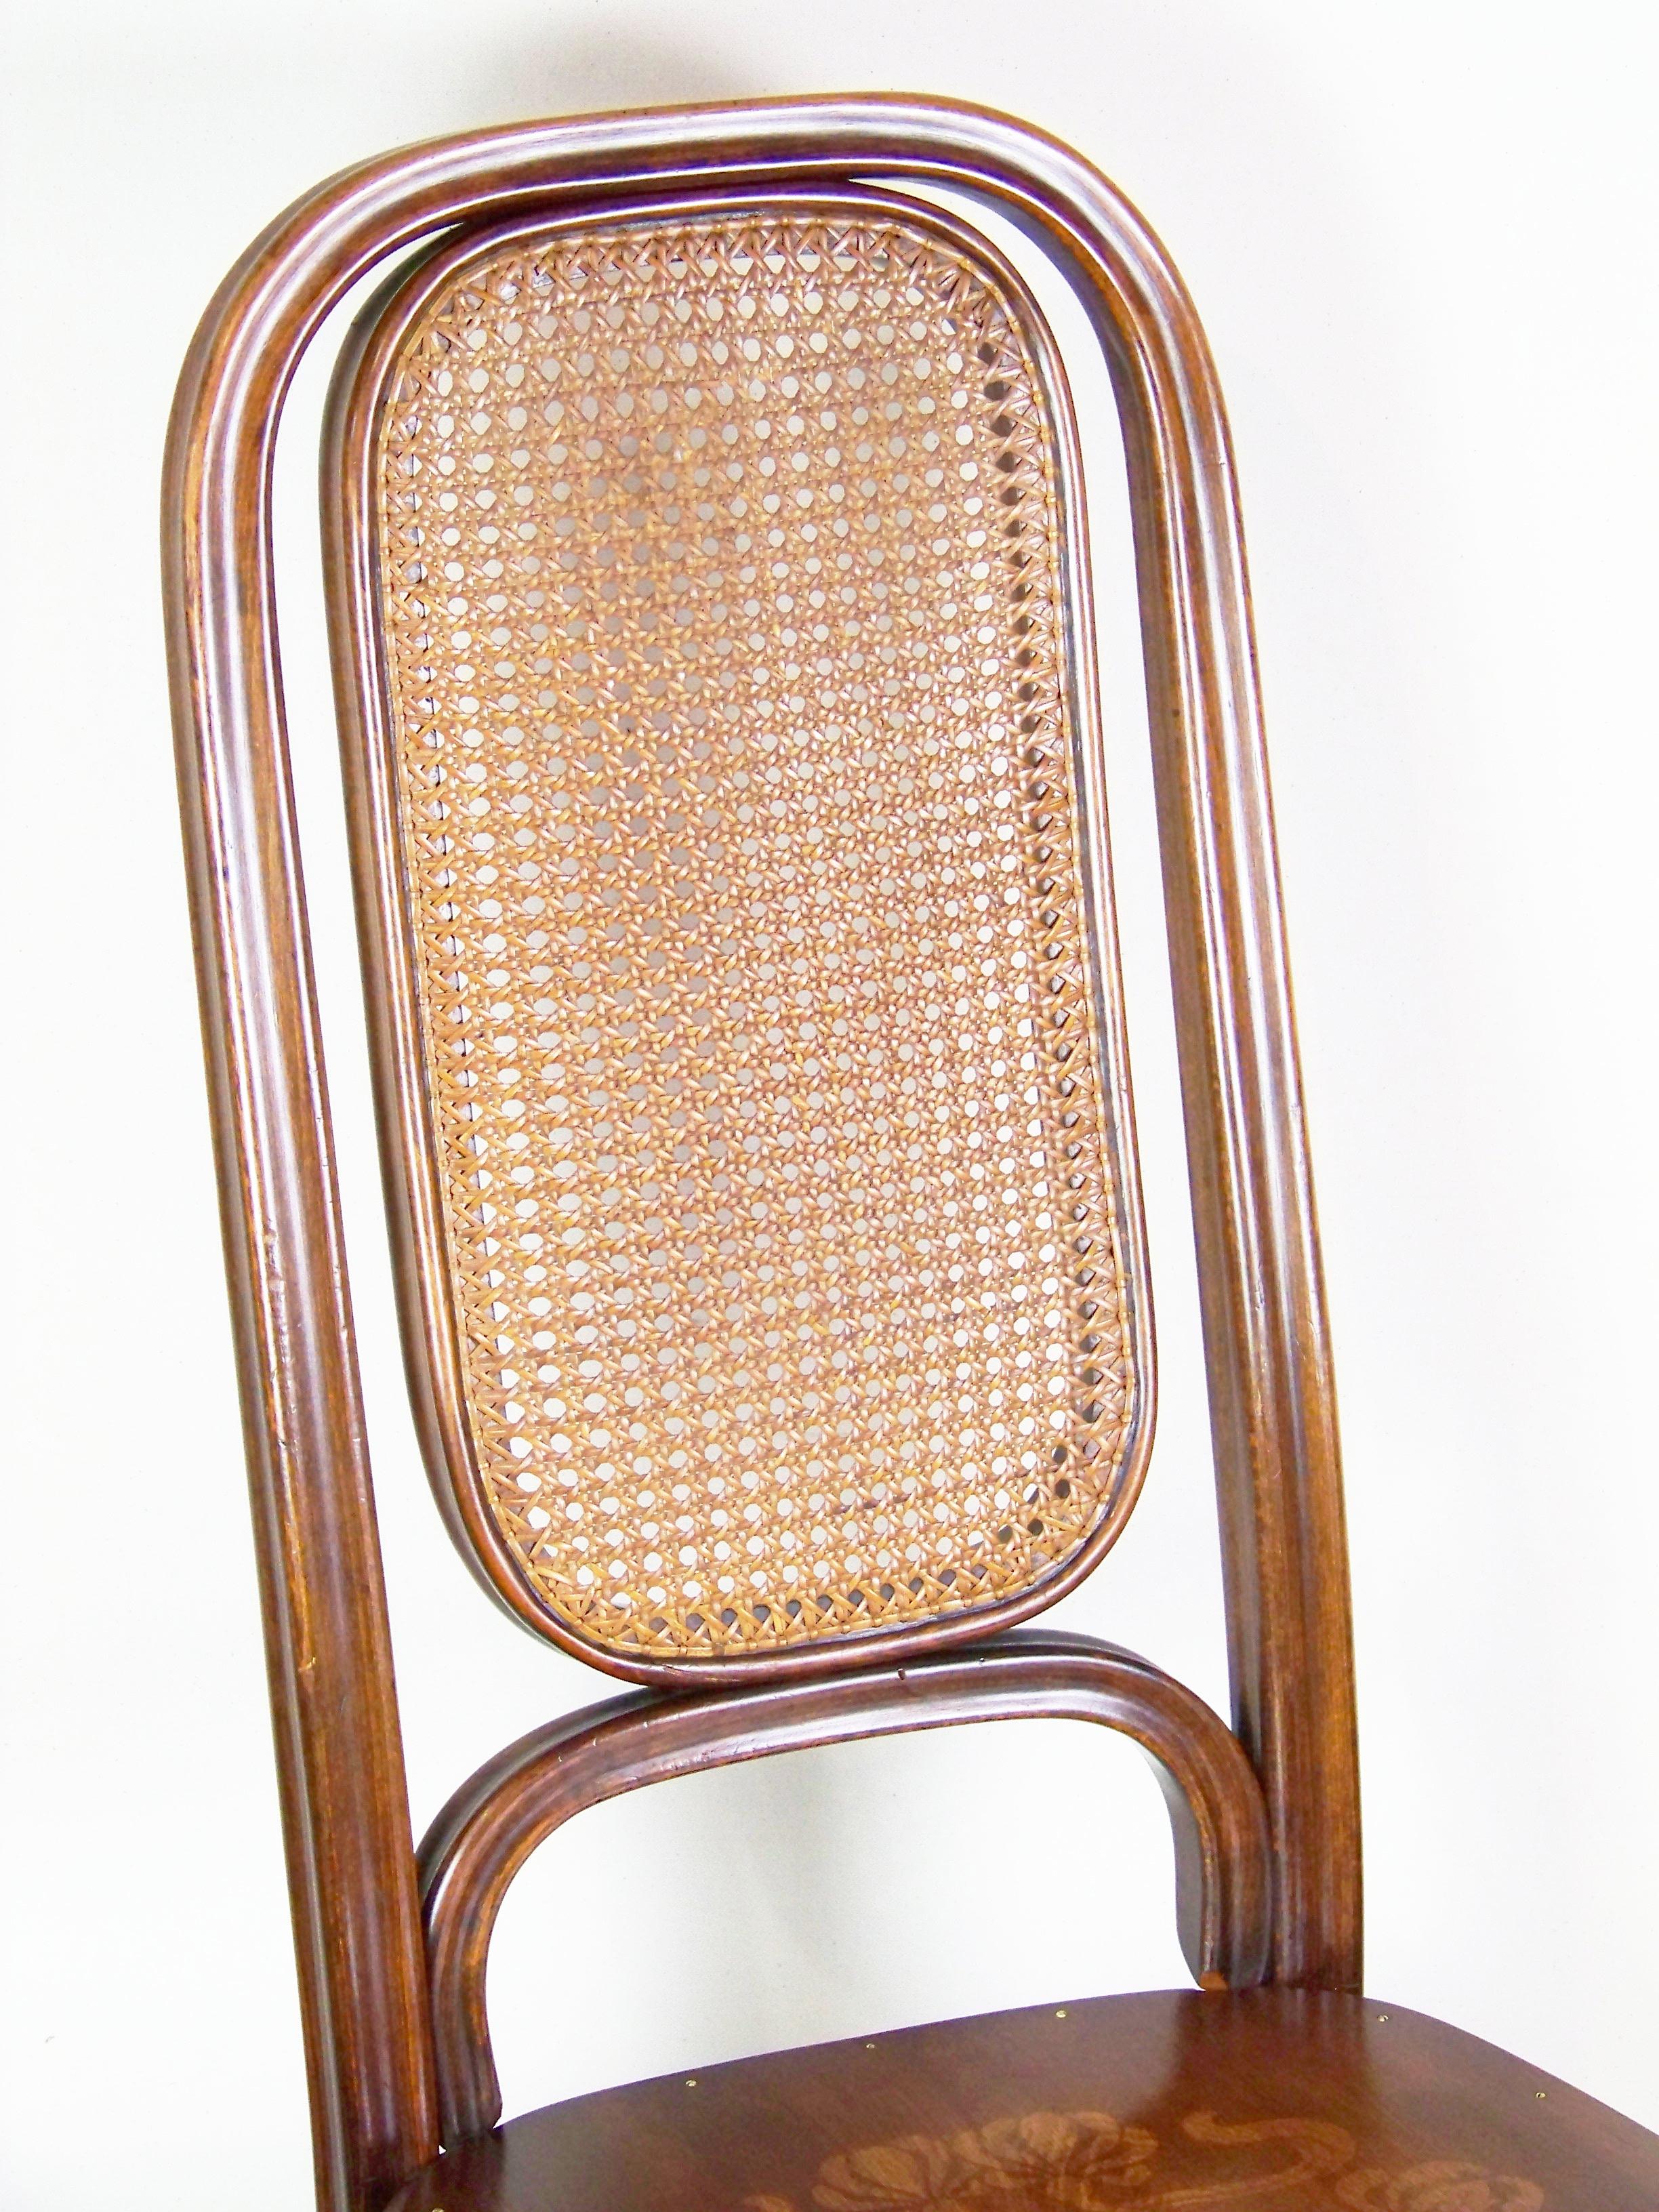 Firm and compact, perfectly cleaned and polished with shellac. The seat, originally woven with pedig, was replaced by a more durable plywood with art nouveau decor. This chair appears in Thonet company catalogs since 1883. It is the first Thonet